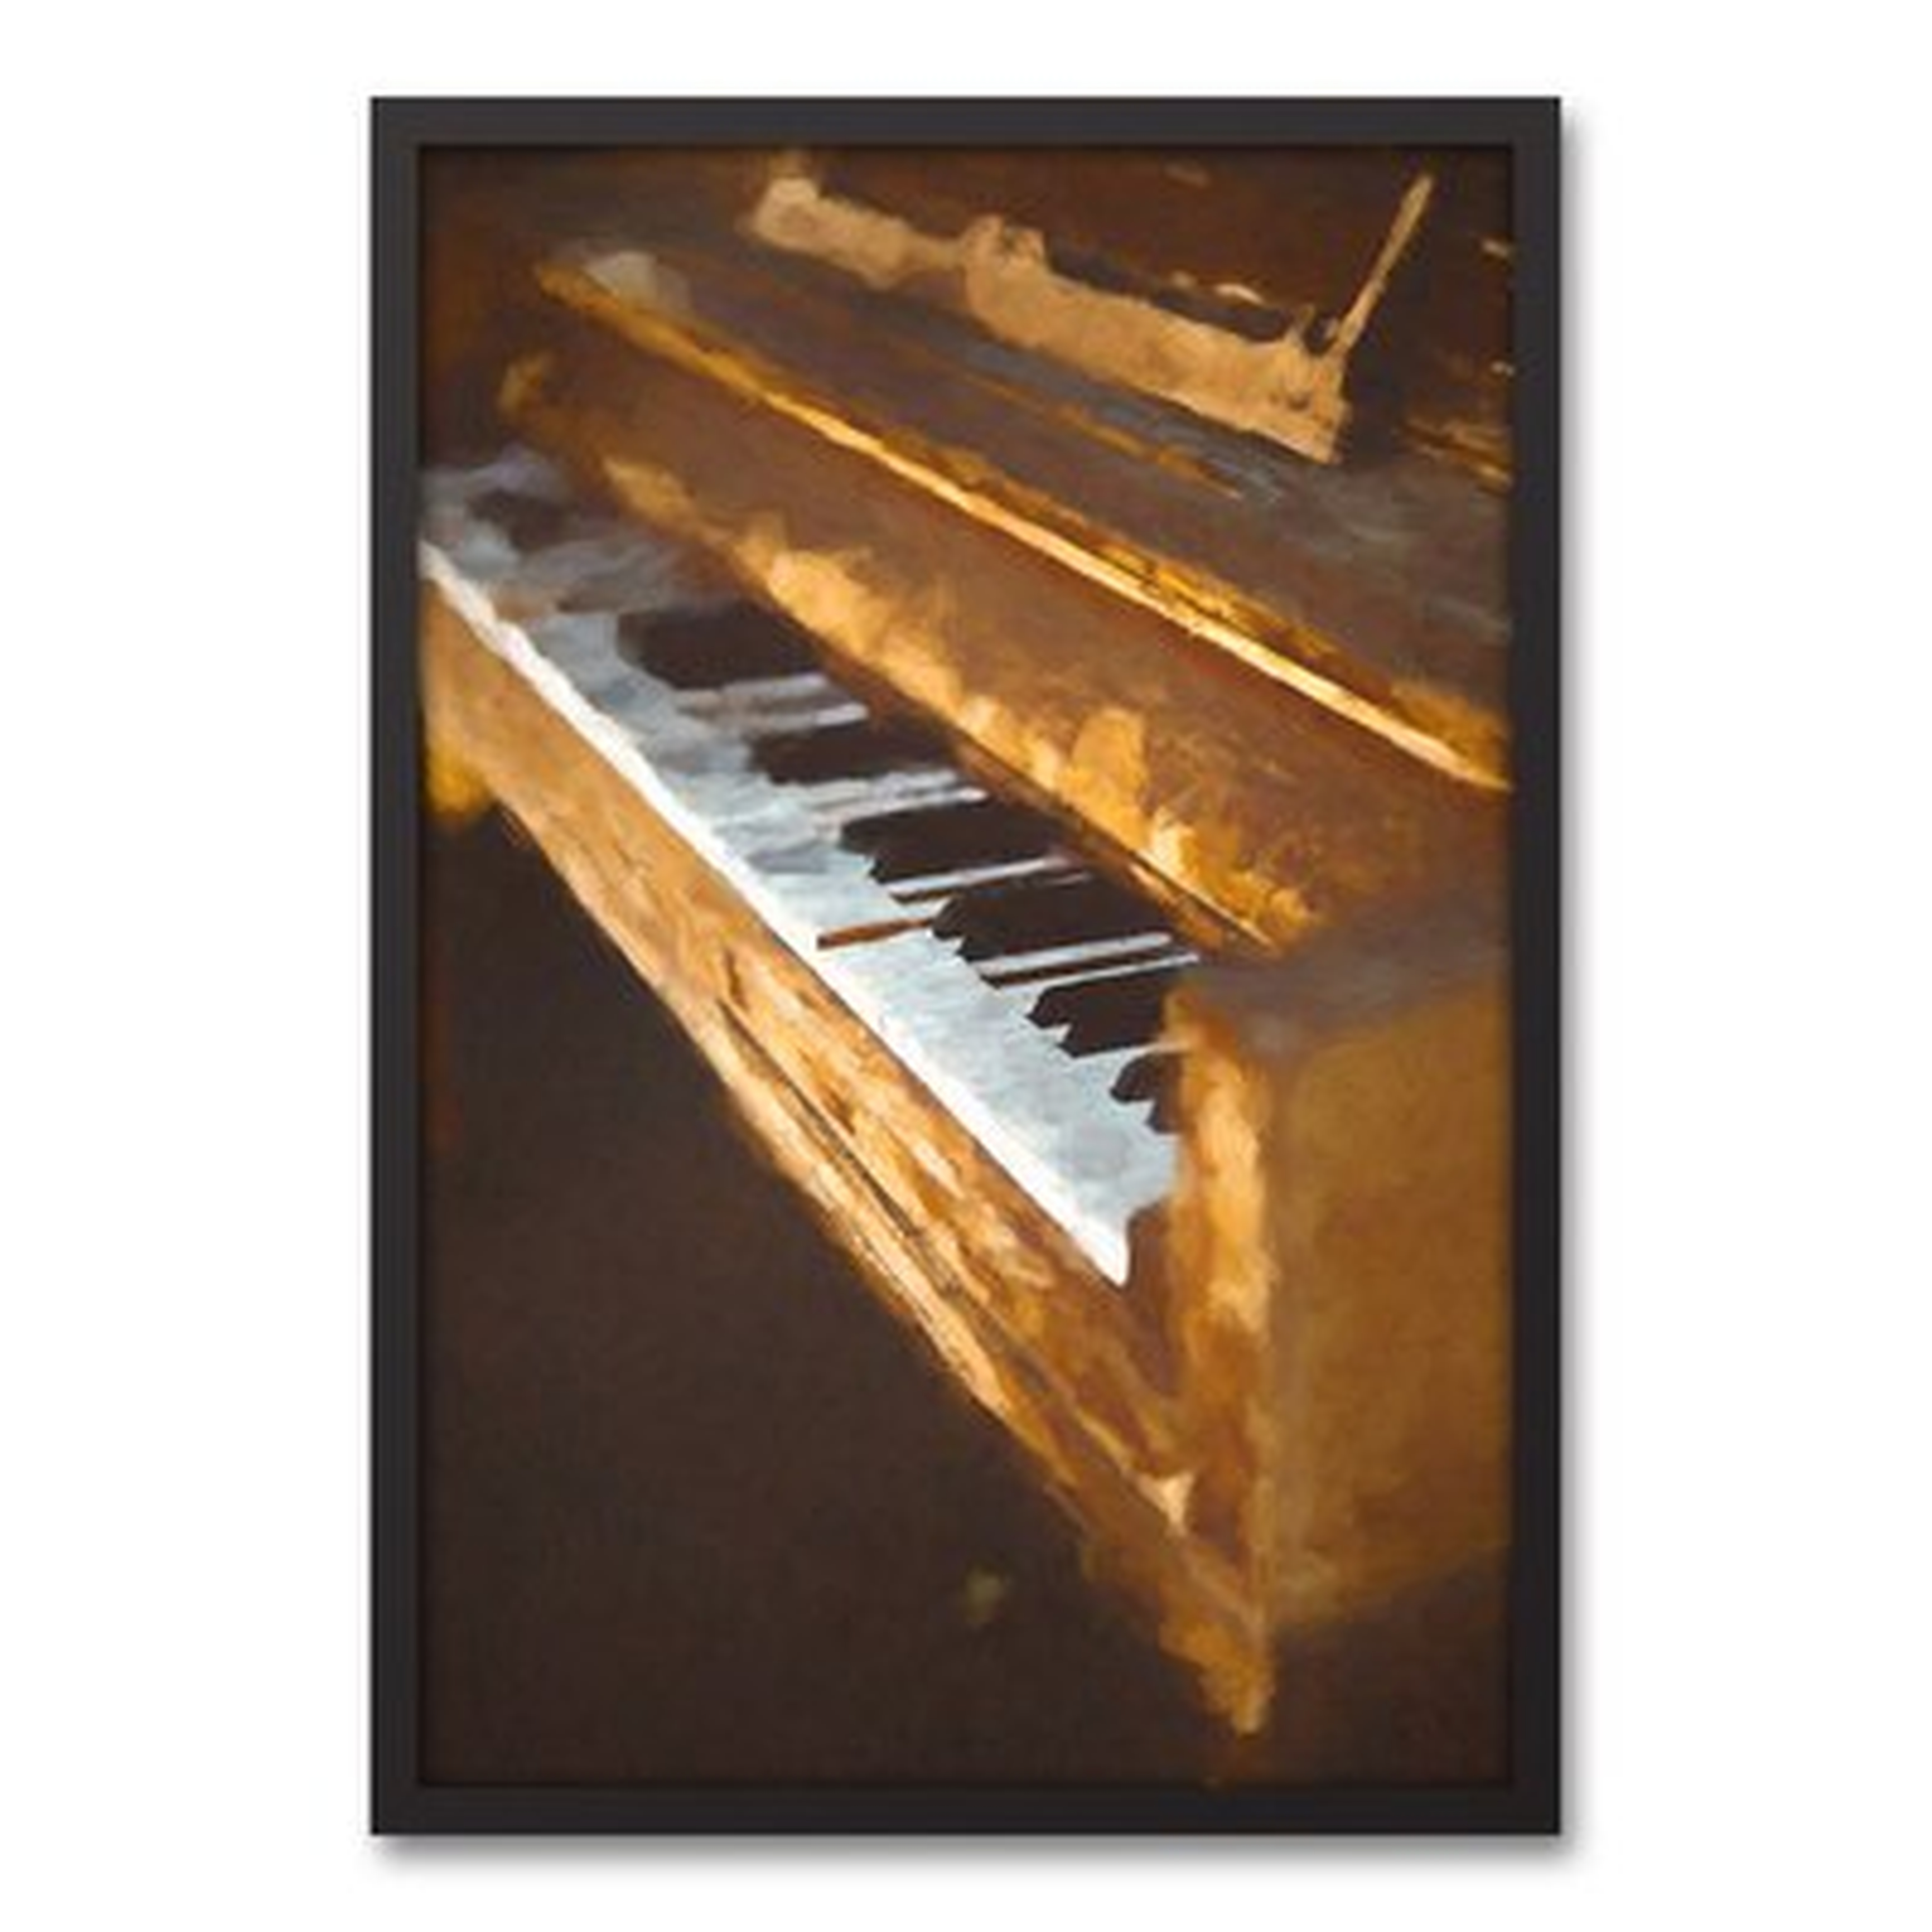 Piano - Picture Frame Painting Print on Canvas - Wayfair